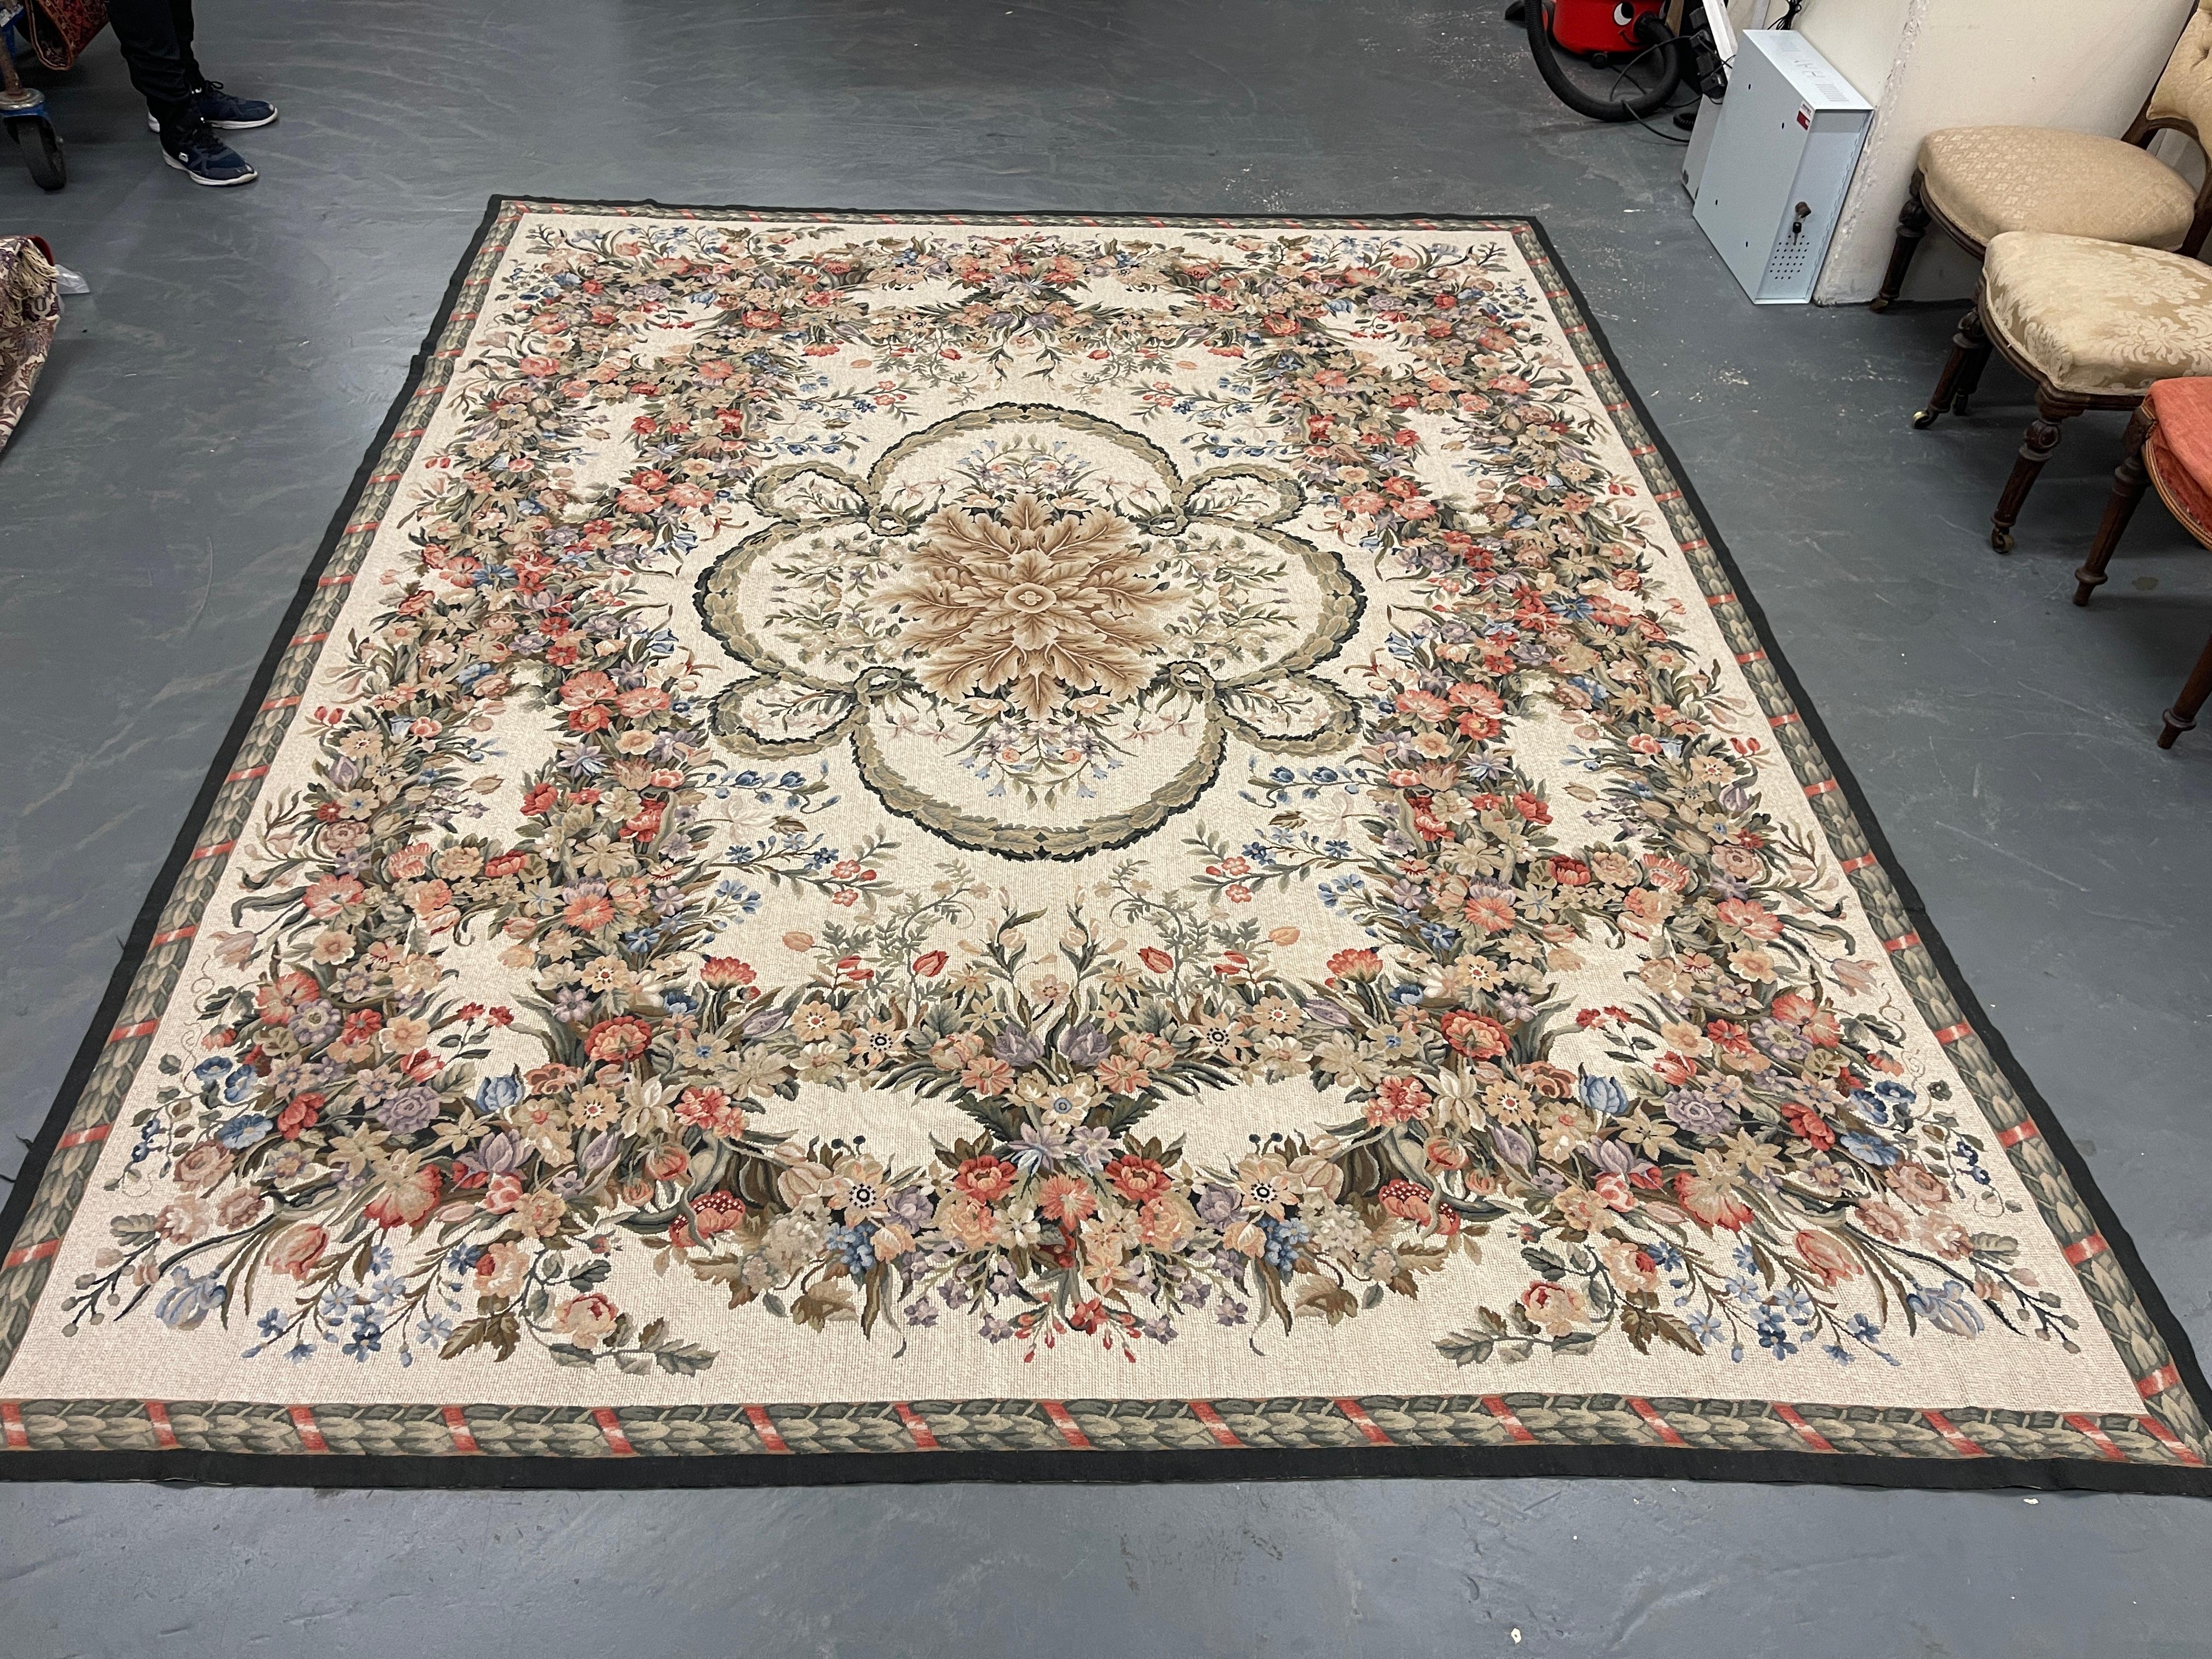 This fantastic area rug has been handwoven with a beautiful, symmetrical floral design woven on an ivory blue background with cream, pink, green and ivory accents. This elegant piece's colour and design make it the perfect accent rug.
This style of